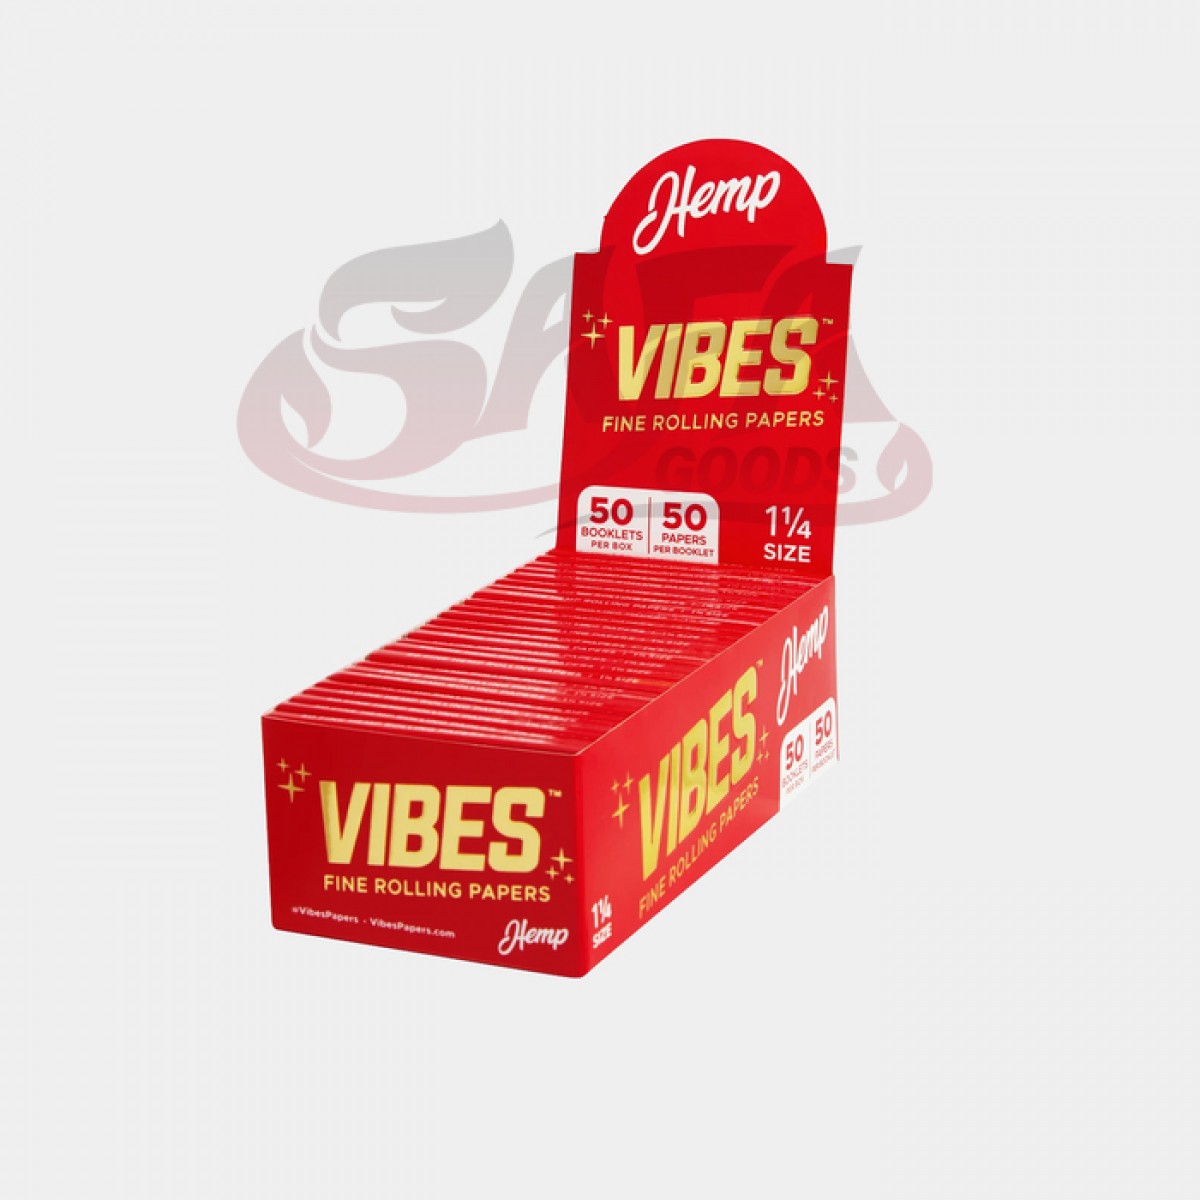 Vibes Rolling Papers 50ct Box - 1-1/4"